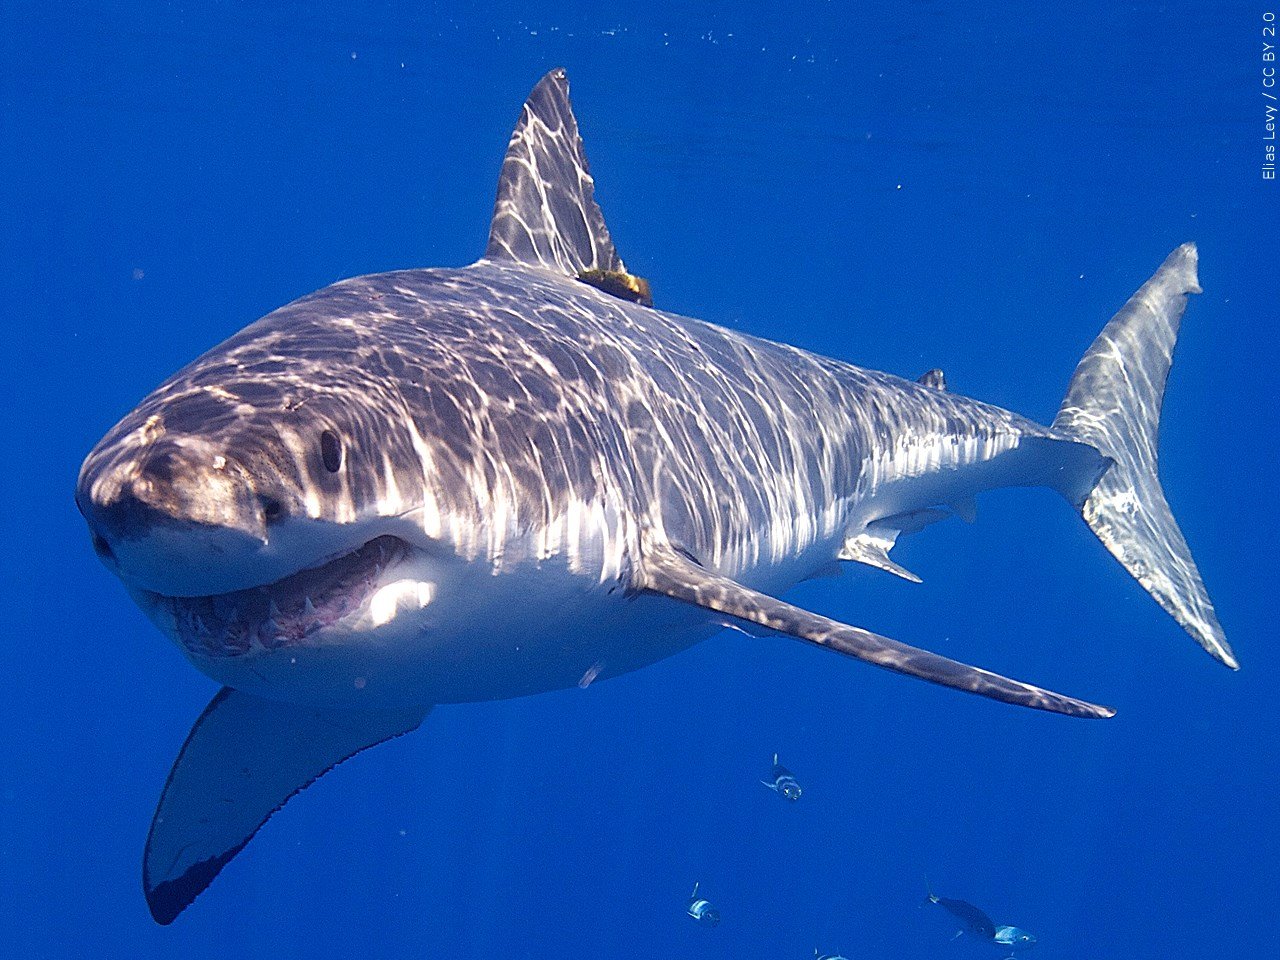 1,000-pound great white shark spotted off New Jersey shoreline